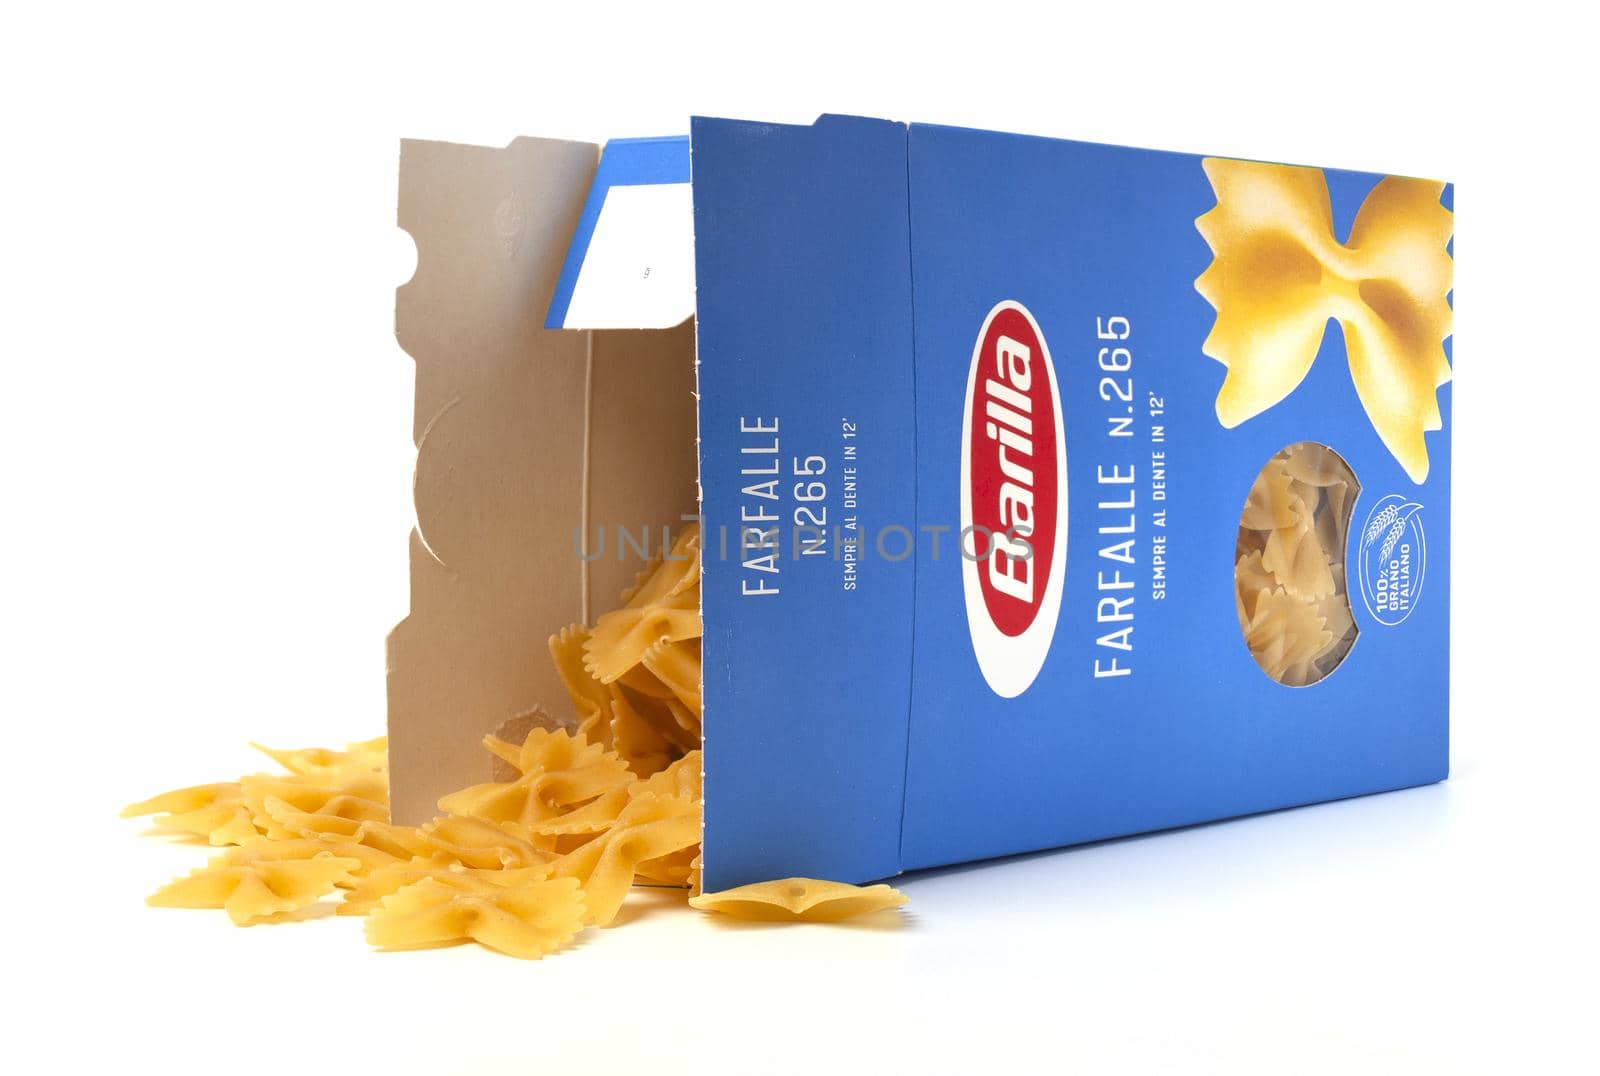 CHISINAU, MOLDOVA - JAugust 22, 2020: Barilla Farfalle Nr 265. Italian pasta in a box isolated on white background. Barilla is an Italian food company, founded in 1877 in Parma, Italy.